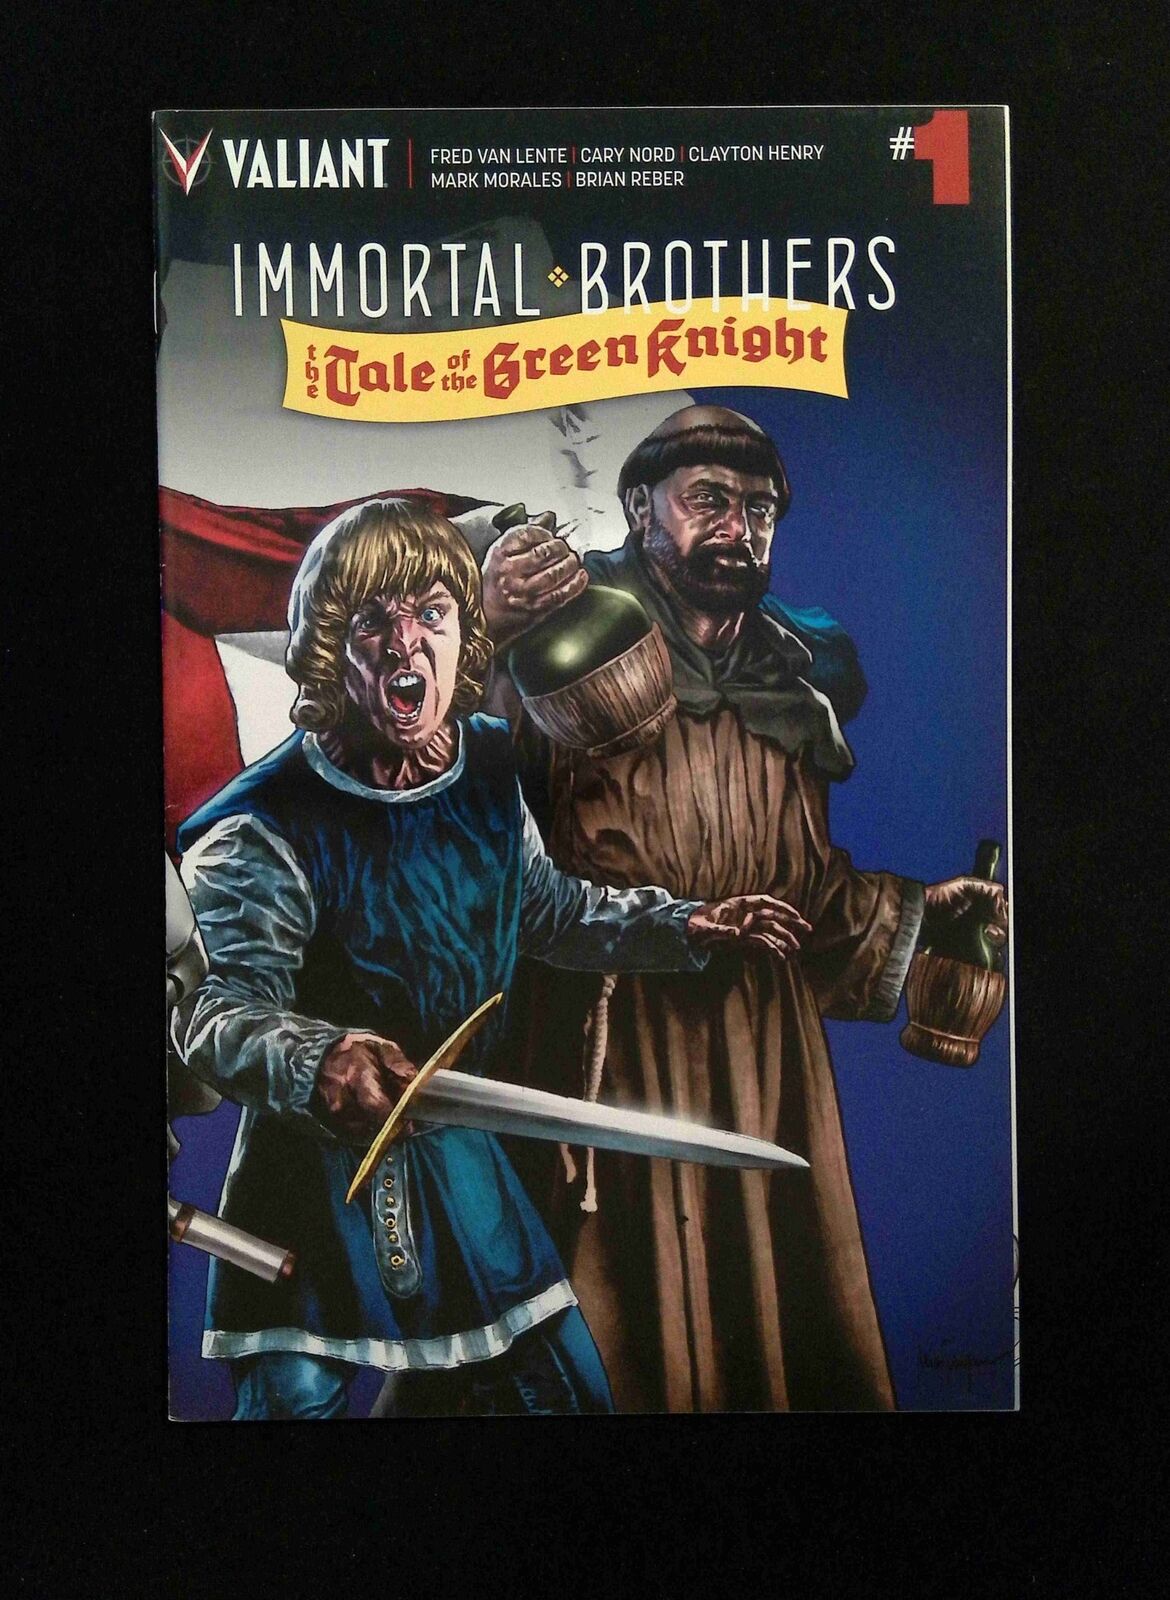 Immortal Brothers The Tale of the Green Knight #1B VALIANT 2017 VF+ VARIANT